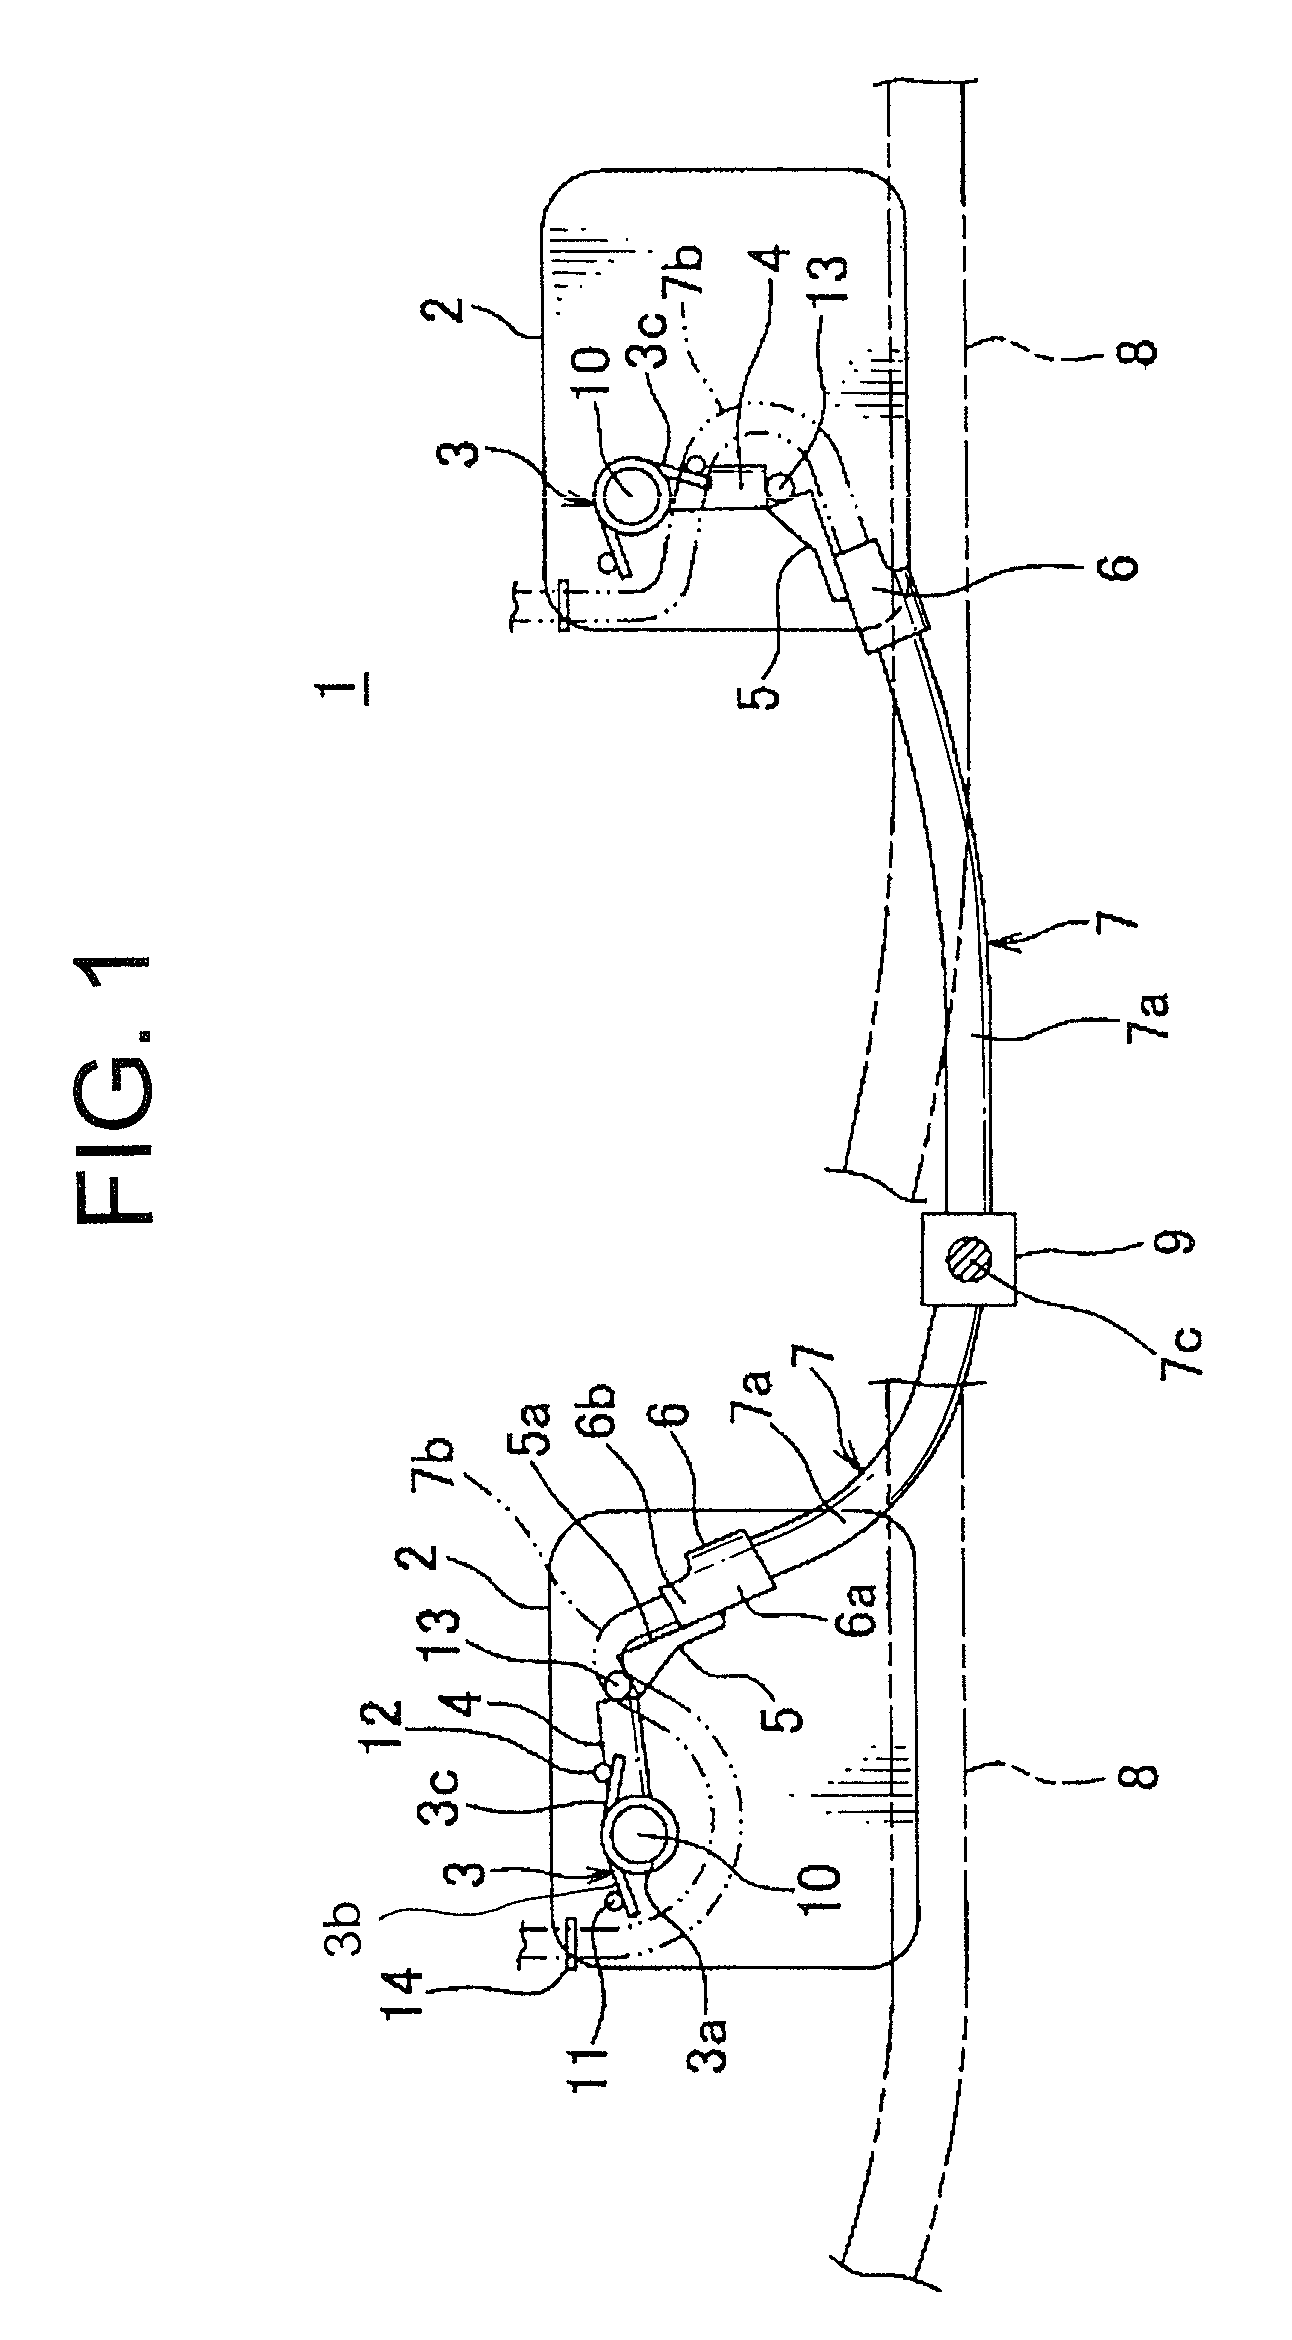 Power supply apparatus for slidable structure